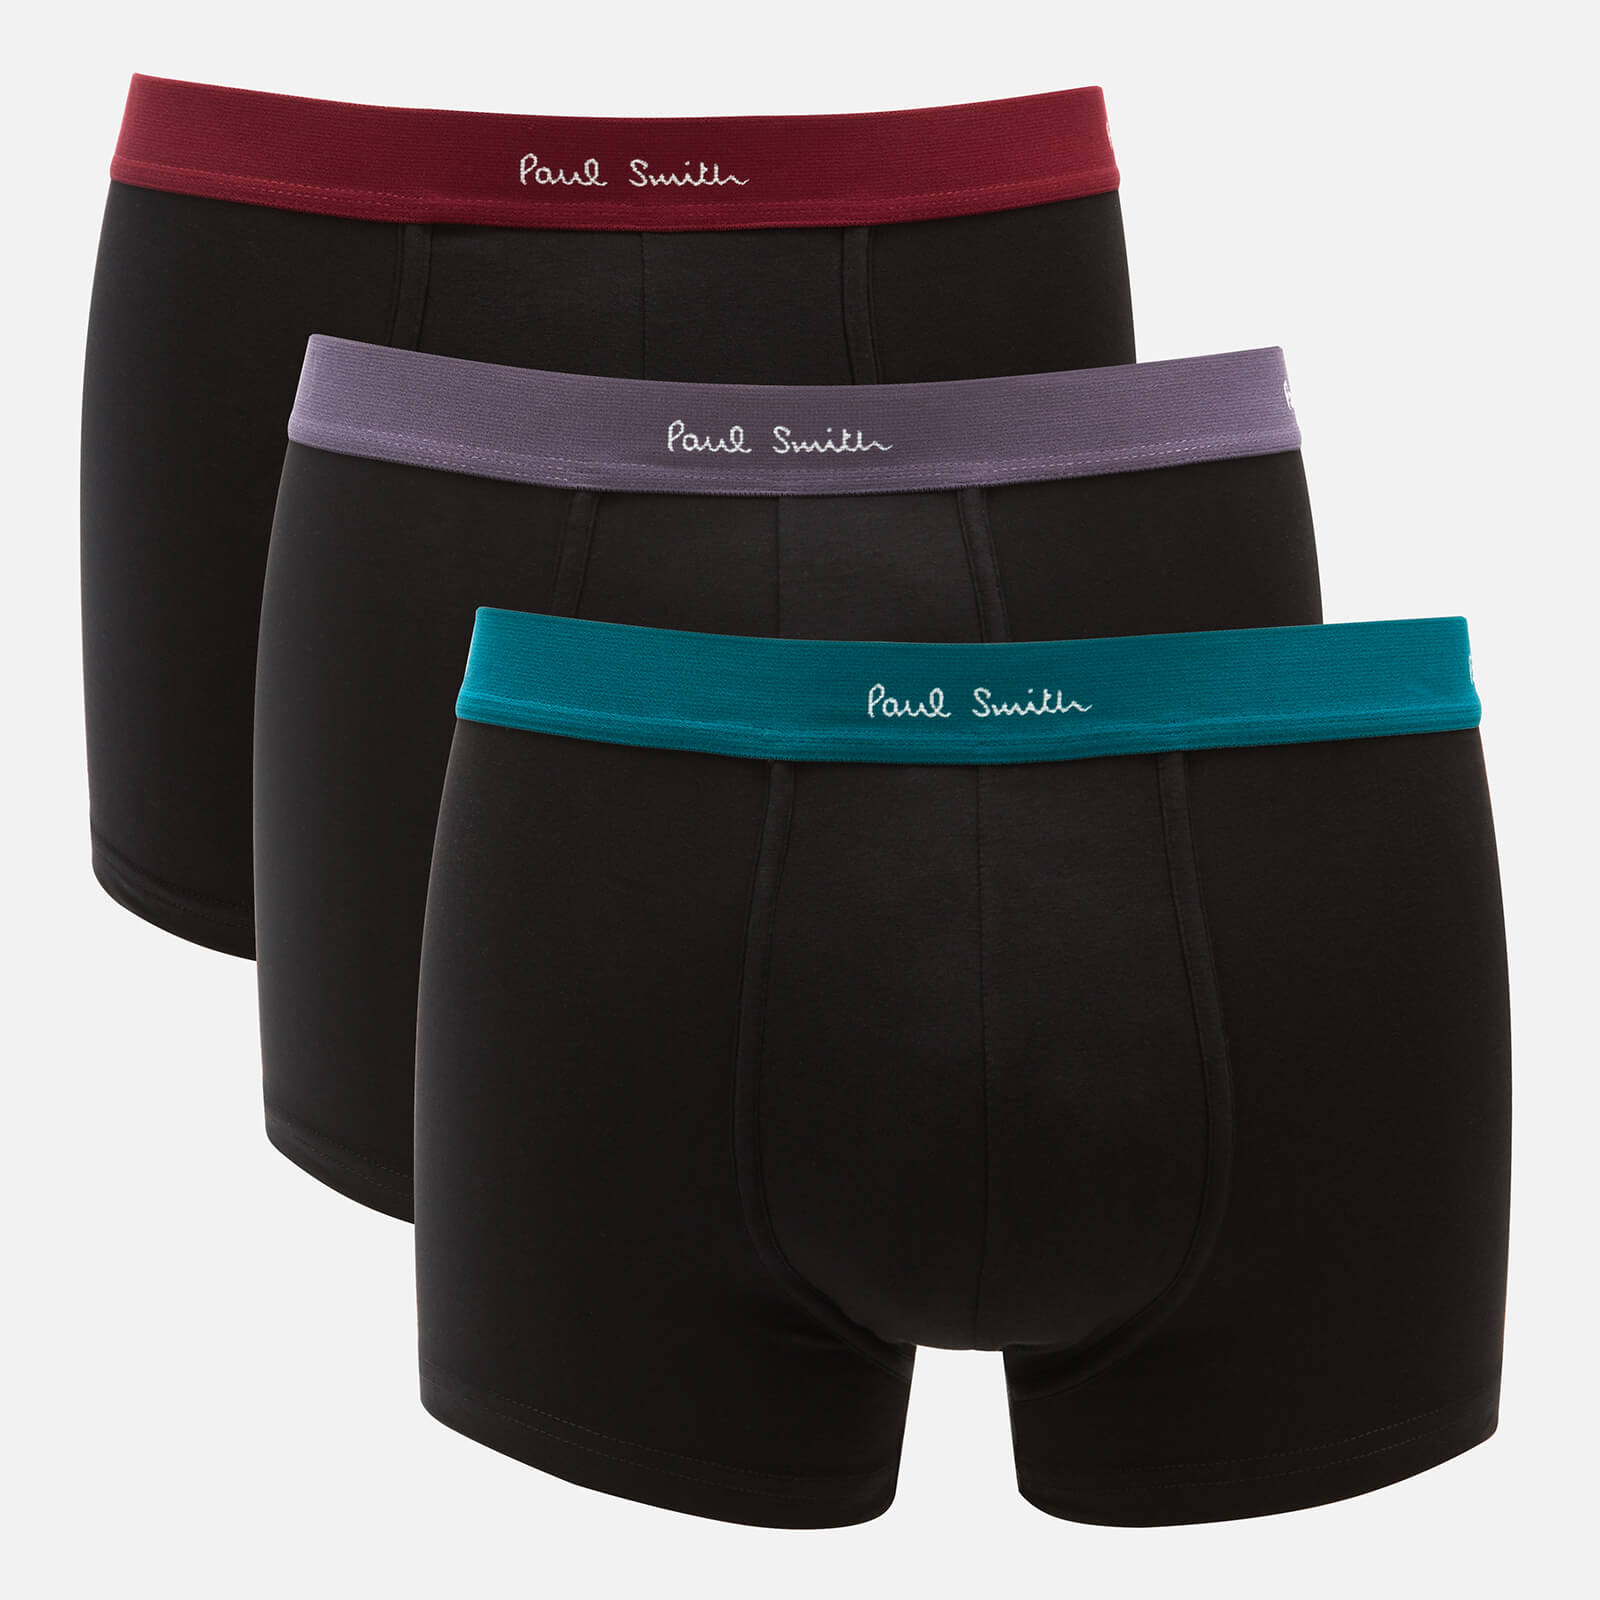 PS Paul Smith Men's 3 Pack Contrast Waistband Trunk Boxer Shorts - Black - S